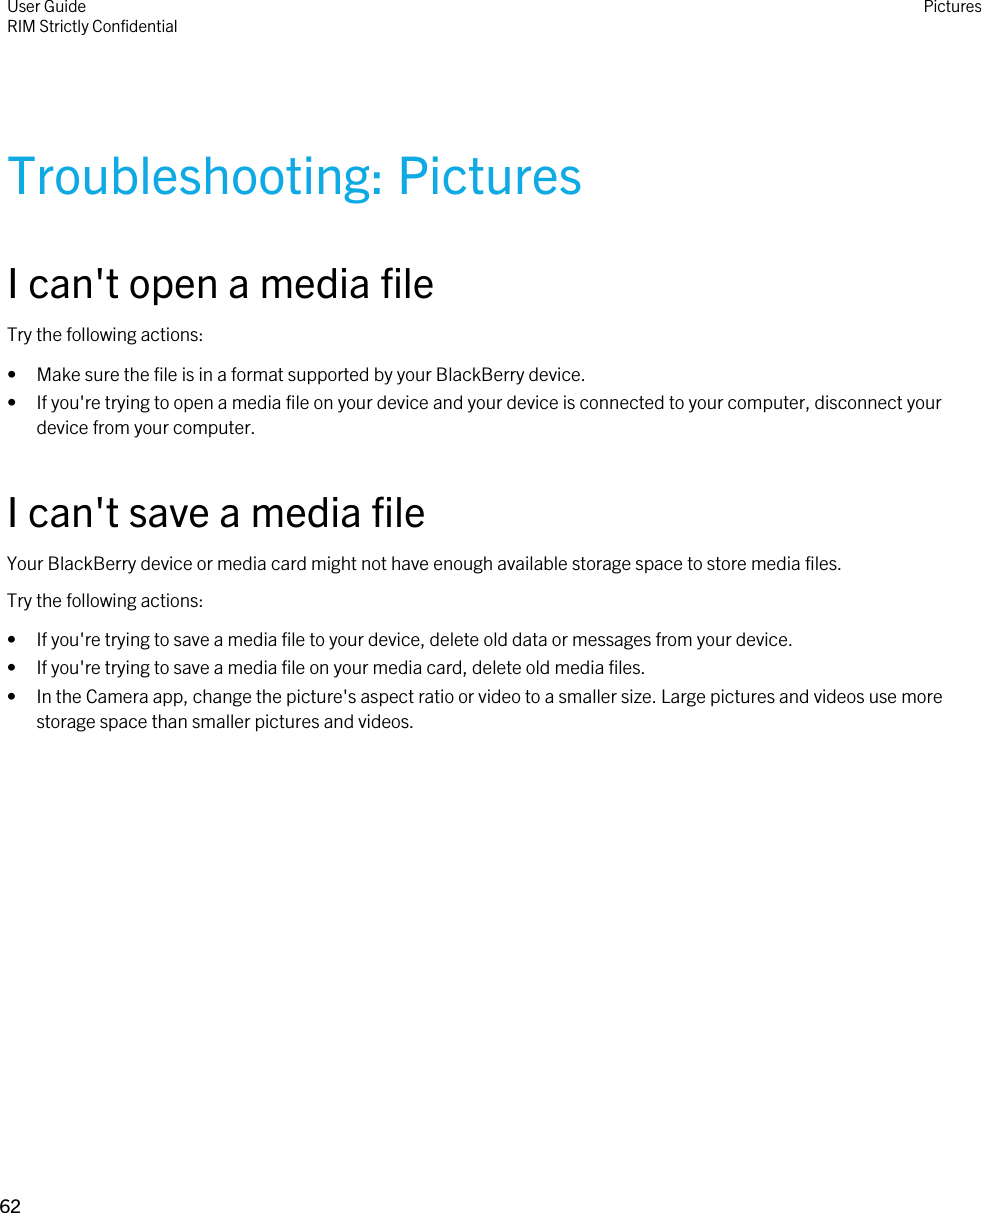 Troubleshooting: PicturesI can&apos;t open a media fileTry the following actions:• Make sure the file is in a format supported by your BlackBerry device.• If you&apos;re trying to open a media file on your device and your device is connected to your computer, disconnect your device from your computer.I can&apos;t save a media fileYour BlackBerry device or media card might not have enough available storage space to store media files.Try the following actions:• If you&apos;re trying to save a media file to your device, delete old data or messages from your device.• If you&apos;re trying to save a media file on your media card, delete old media files.• In the Camera app, change the picture&apos;s aspect ratio or video to a smaller size. Large pictures and videos use more storage space than smaller pictures and videos.User GuideRIM Strictly ConfidentialPictures62 